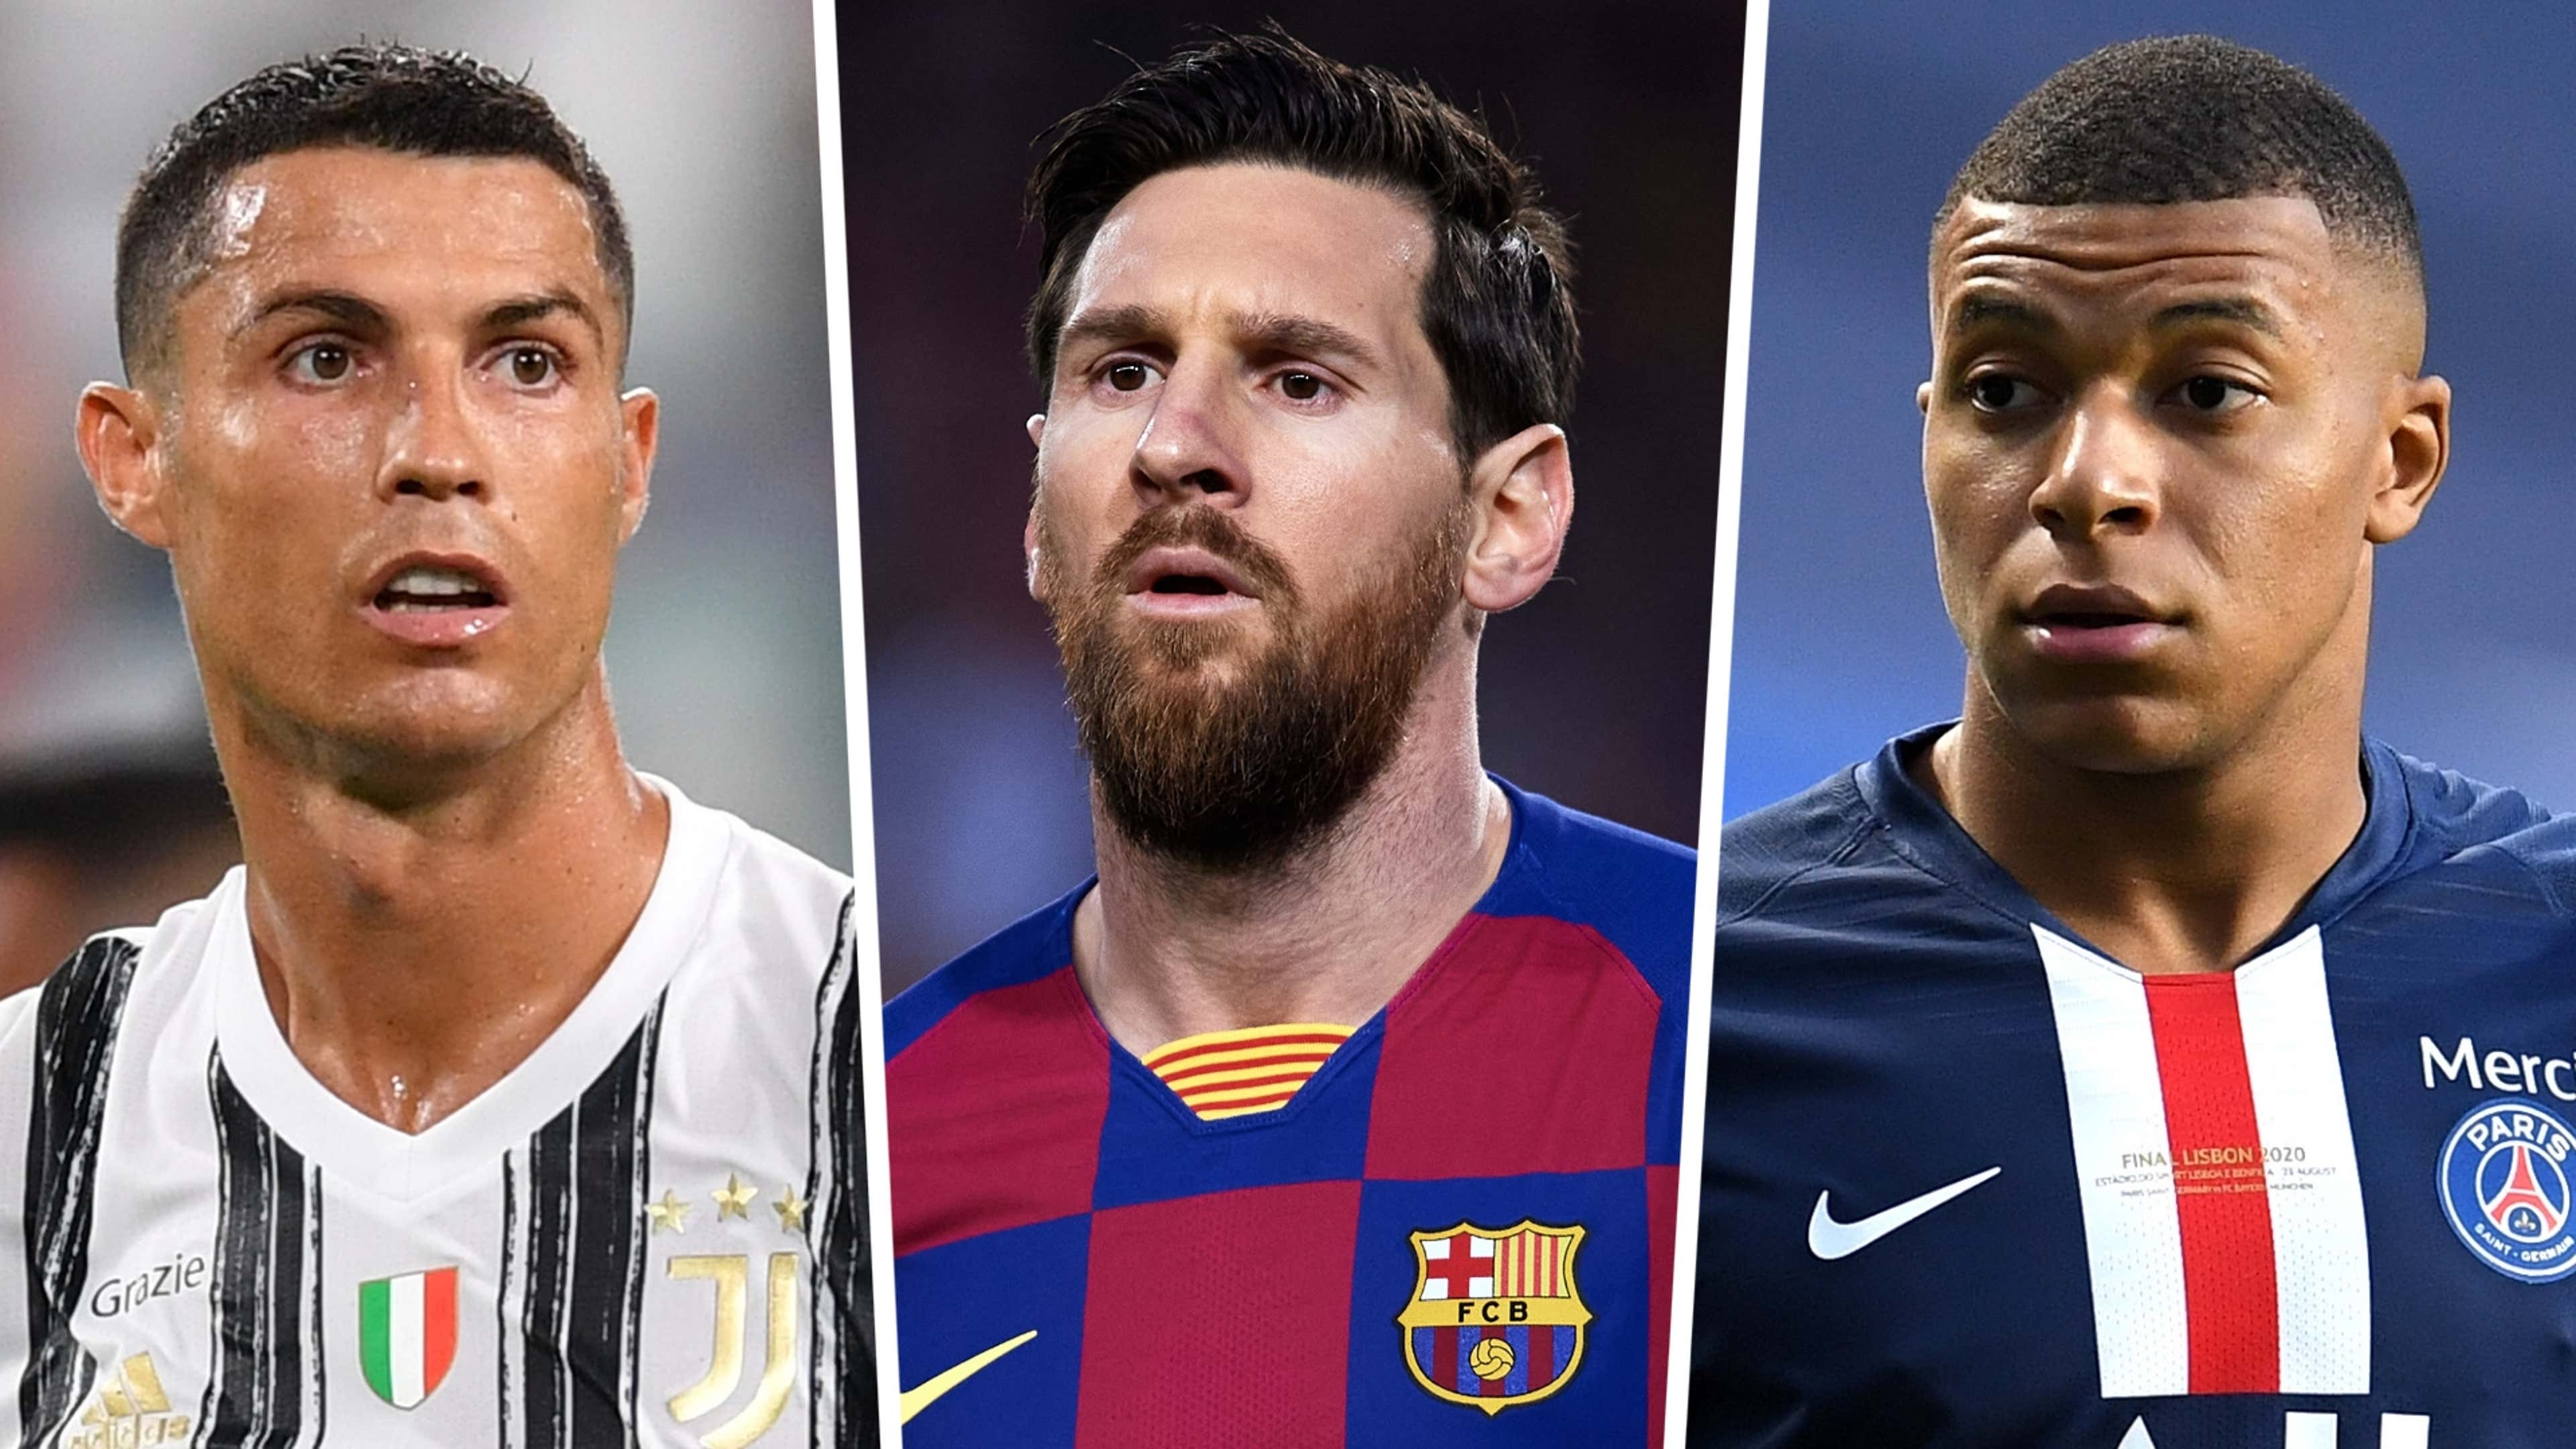 LiveScore - The ten best players in the world according to FIFA 21